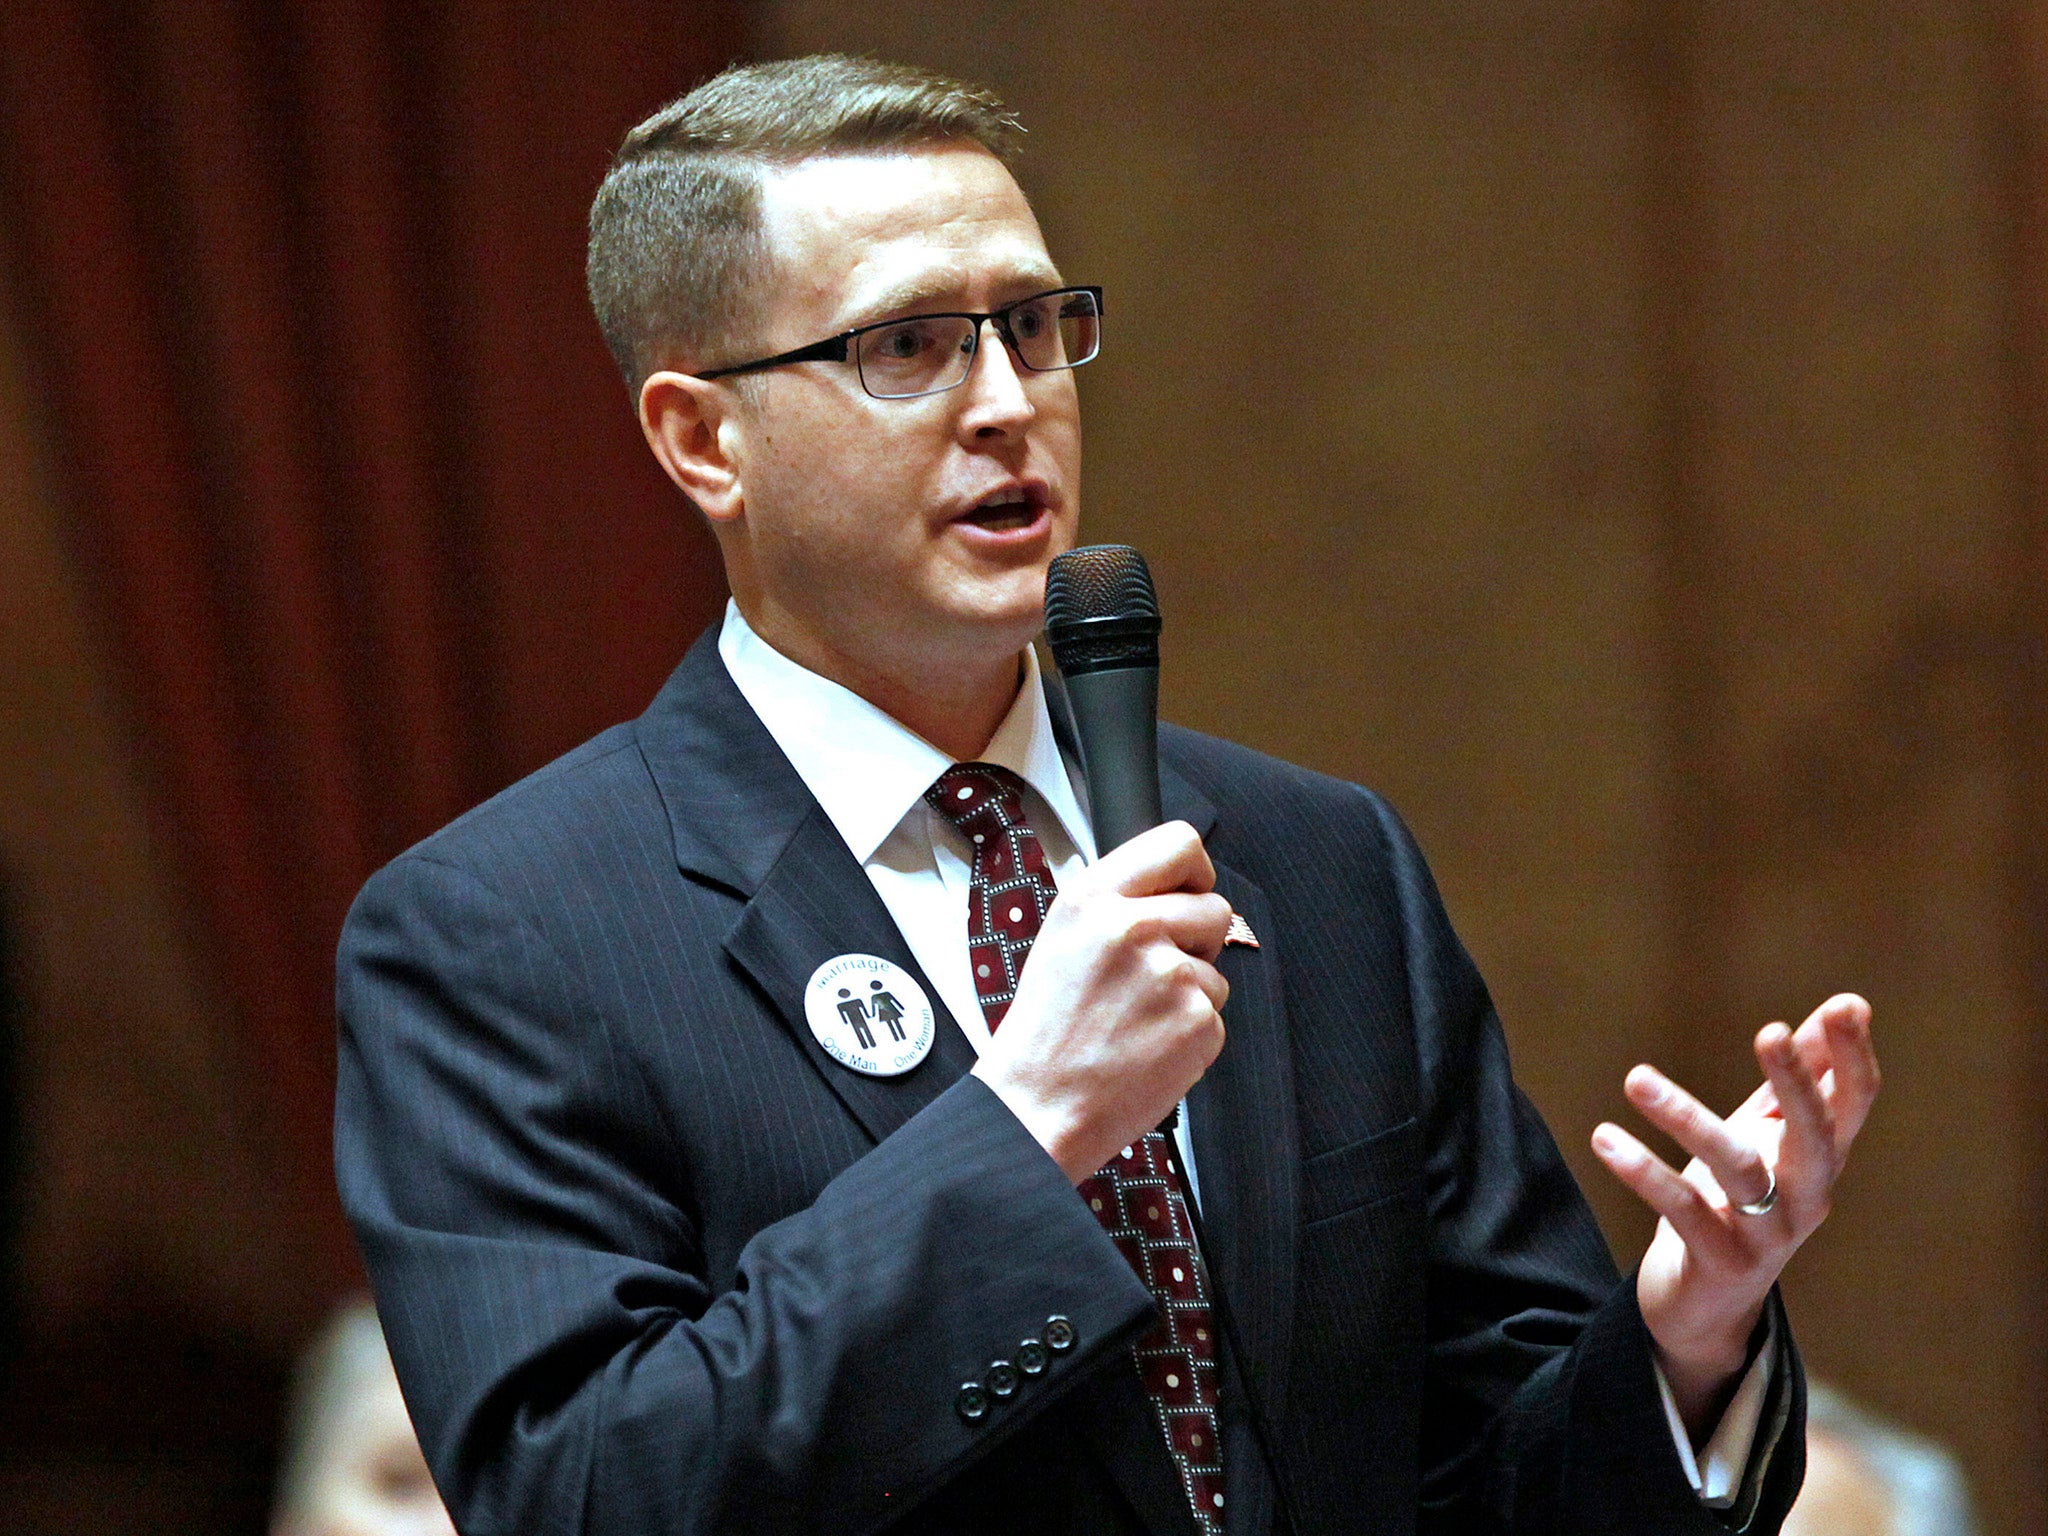 Matt Shea is a former state lawmaker from Washginton